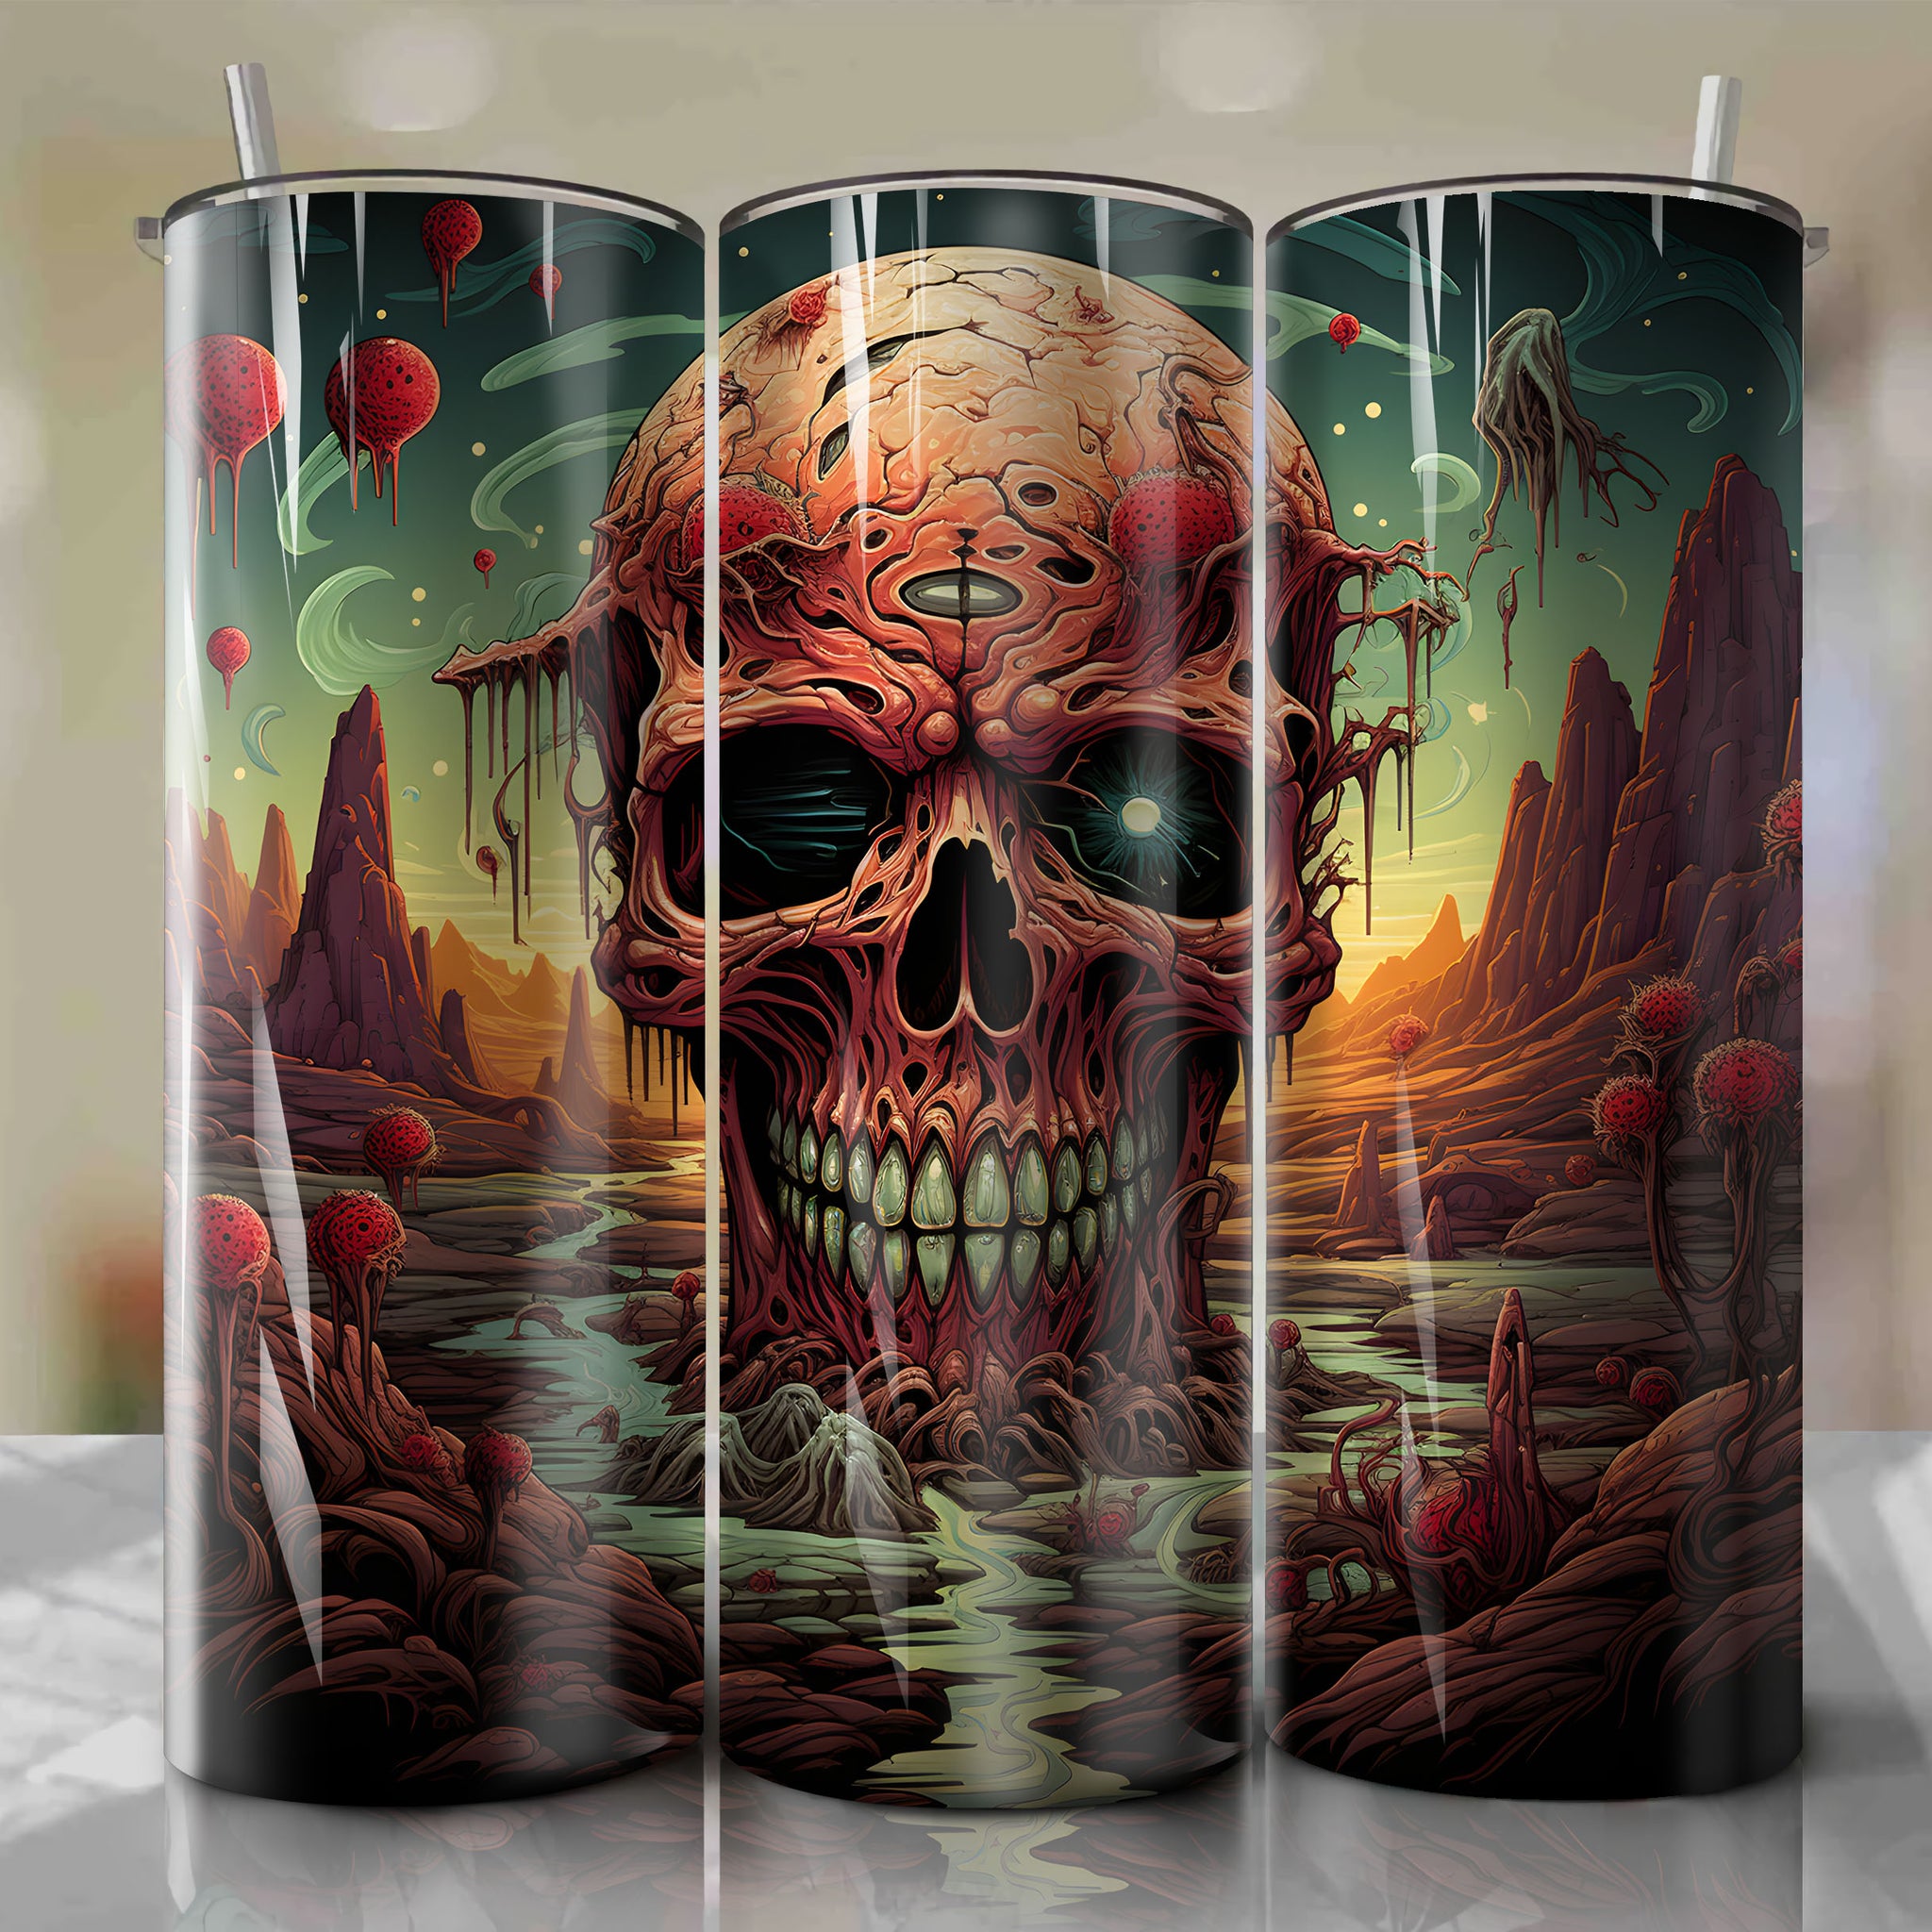 20 Oz Tumbler Wrap - Deformed Creature from The Hills Have Eyes Artwork by Dan Mumford
